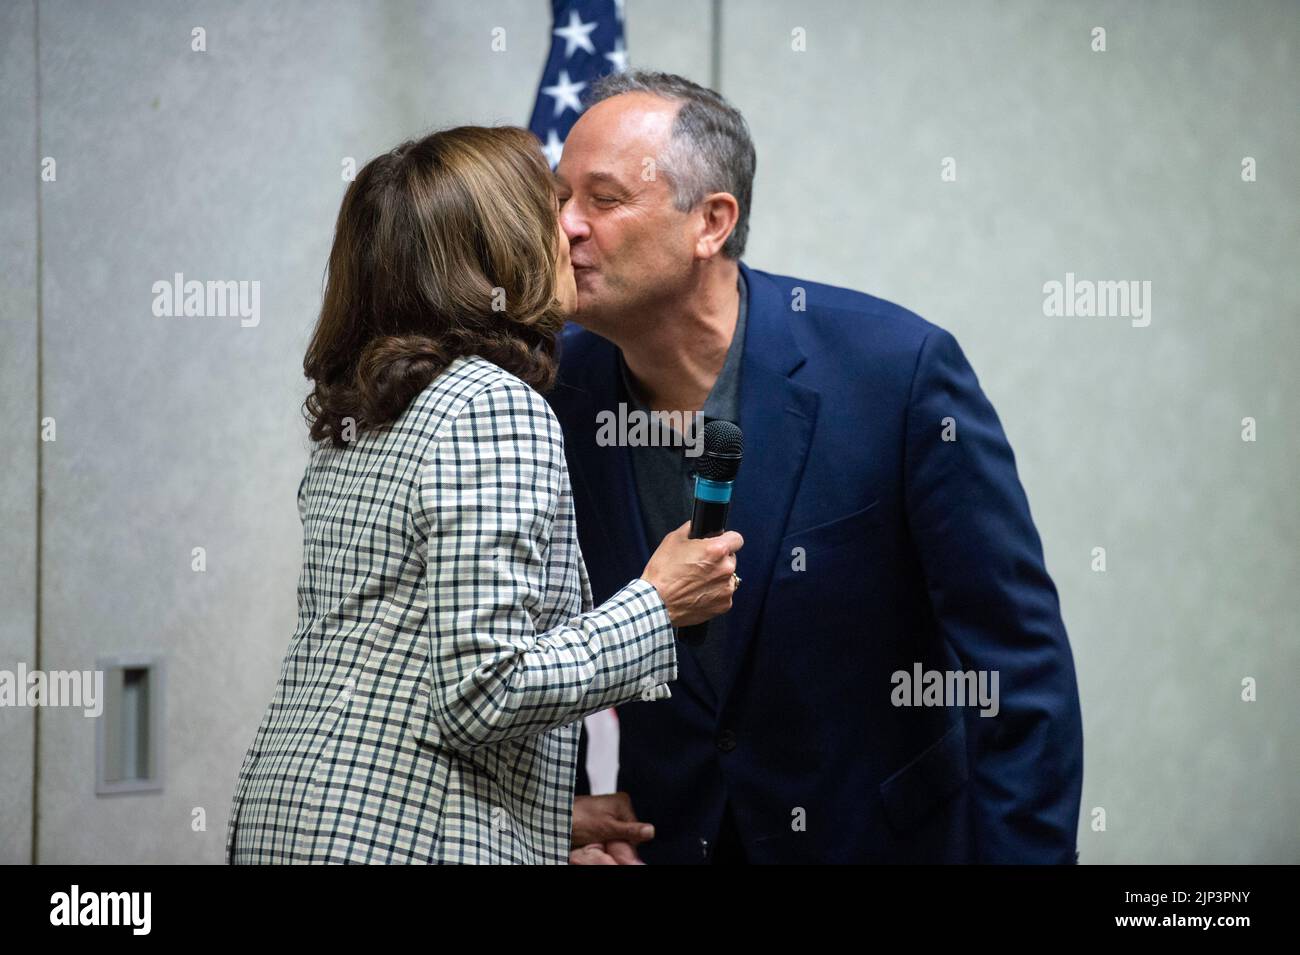 Washington, United States Of America. 30th July, 2022. United States Vice President Kamala Harris kisses First Gentleman Doug Emhoff before speaking to Democratic National Committee staff and volunteers to commemorate 100 days from the midterms on Saturday, July 30, 2022 in Washington, DC. Credit: Bonnie Cash/Pool via CNP/AdMedia/Newscom/Alamy Live News Stock Photo